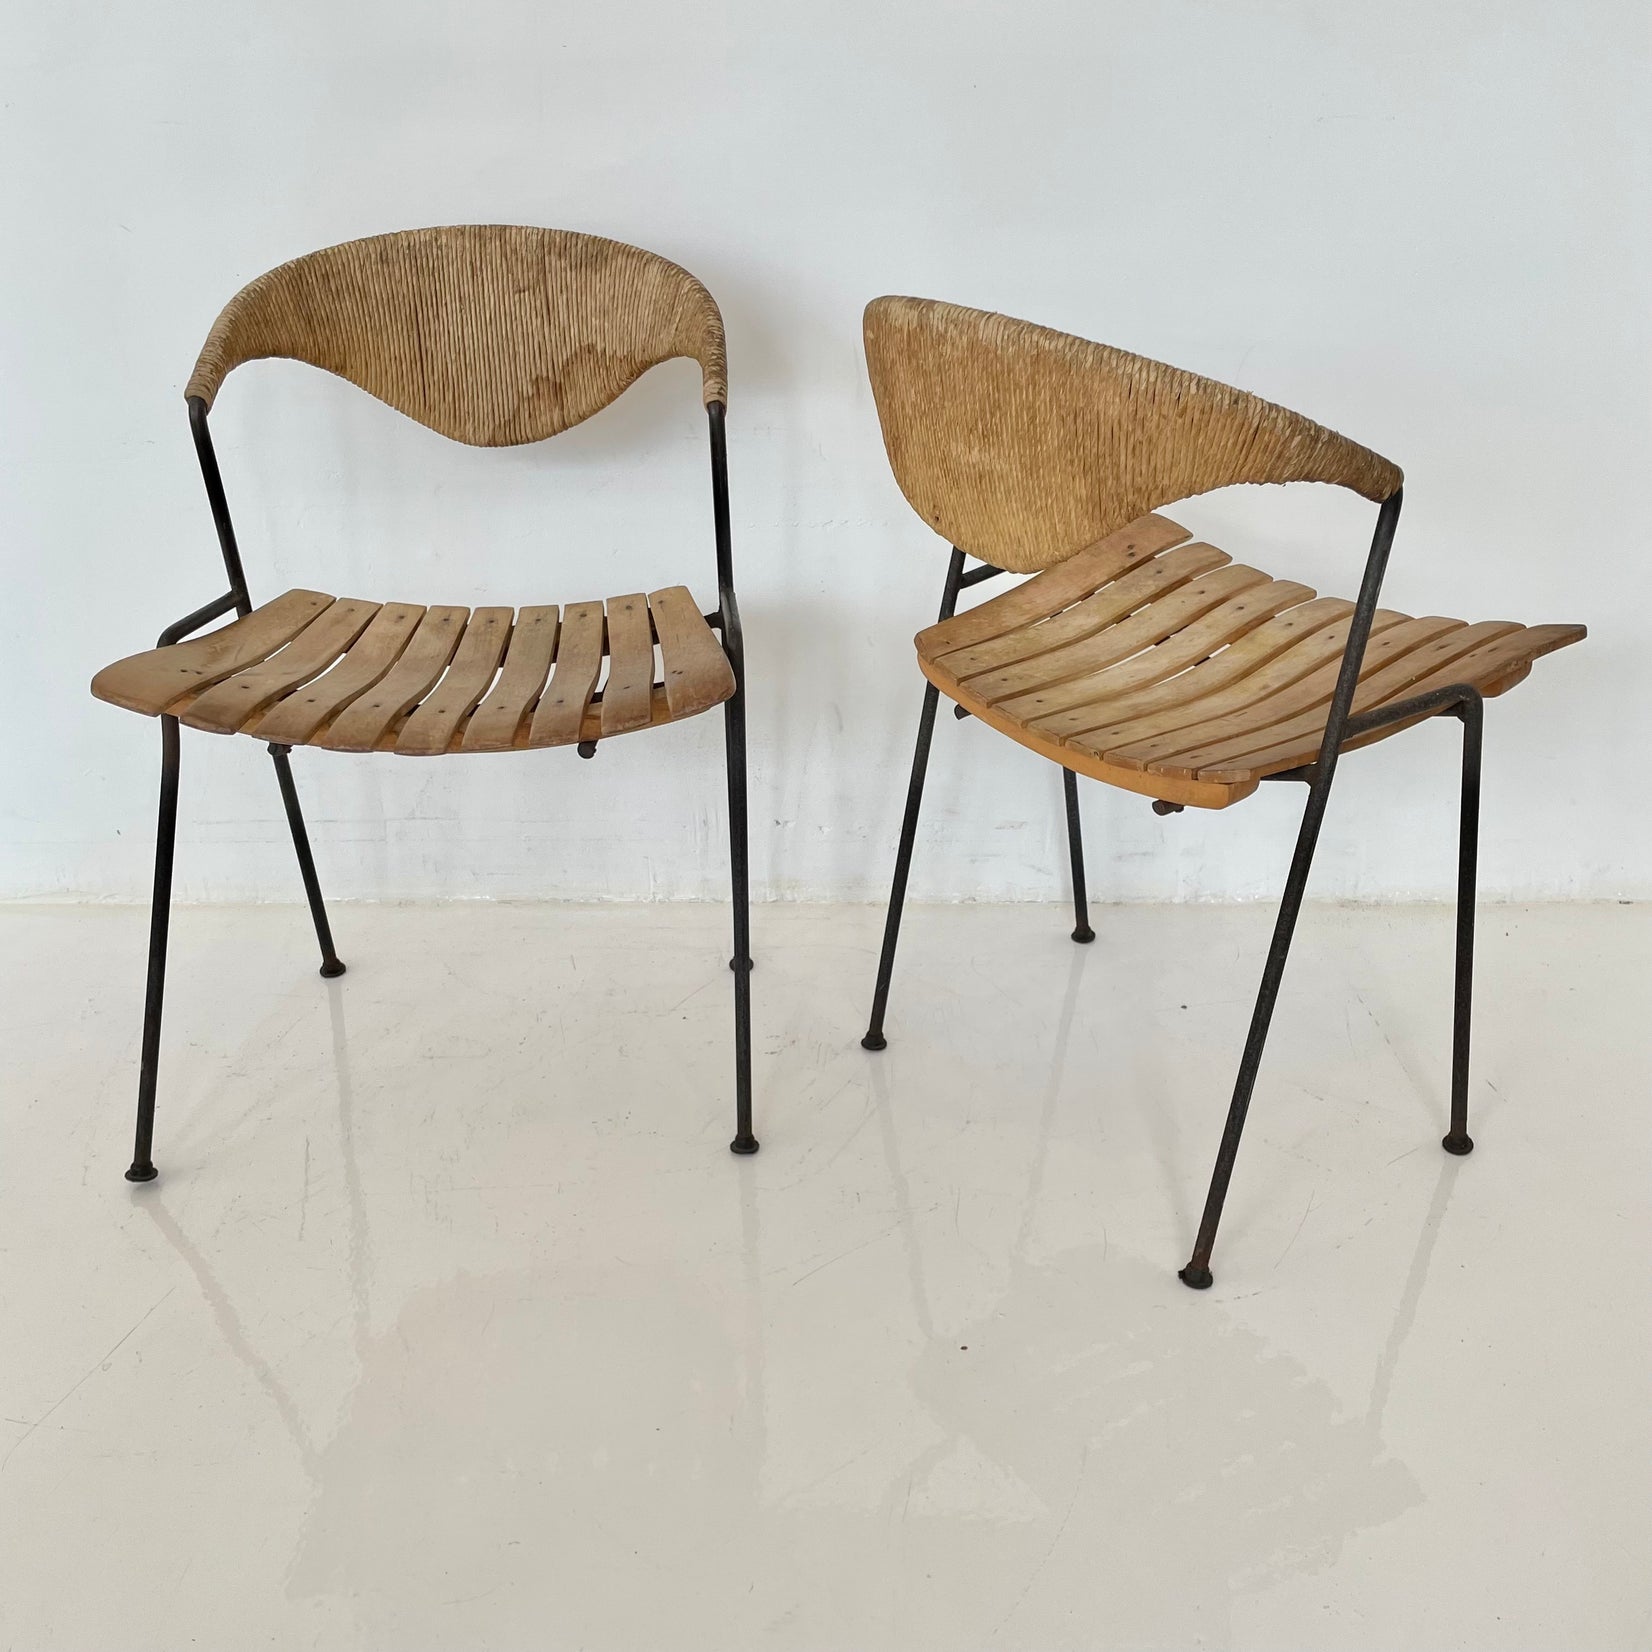 Arthur Umanoff Wood and Rush Sculptural Chairs, 1950s United States